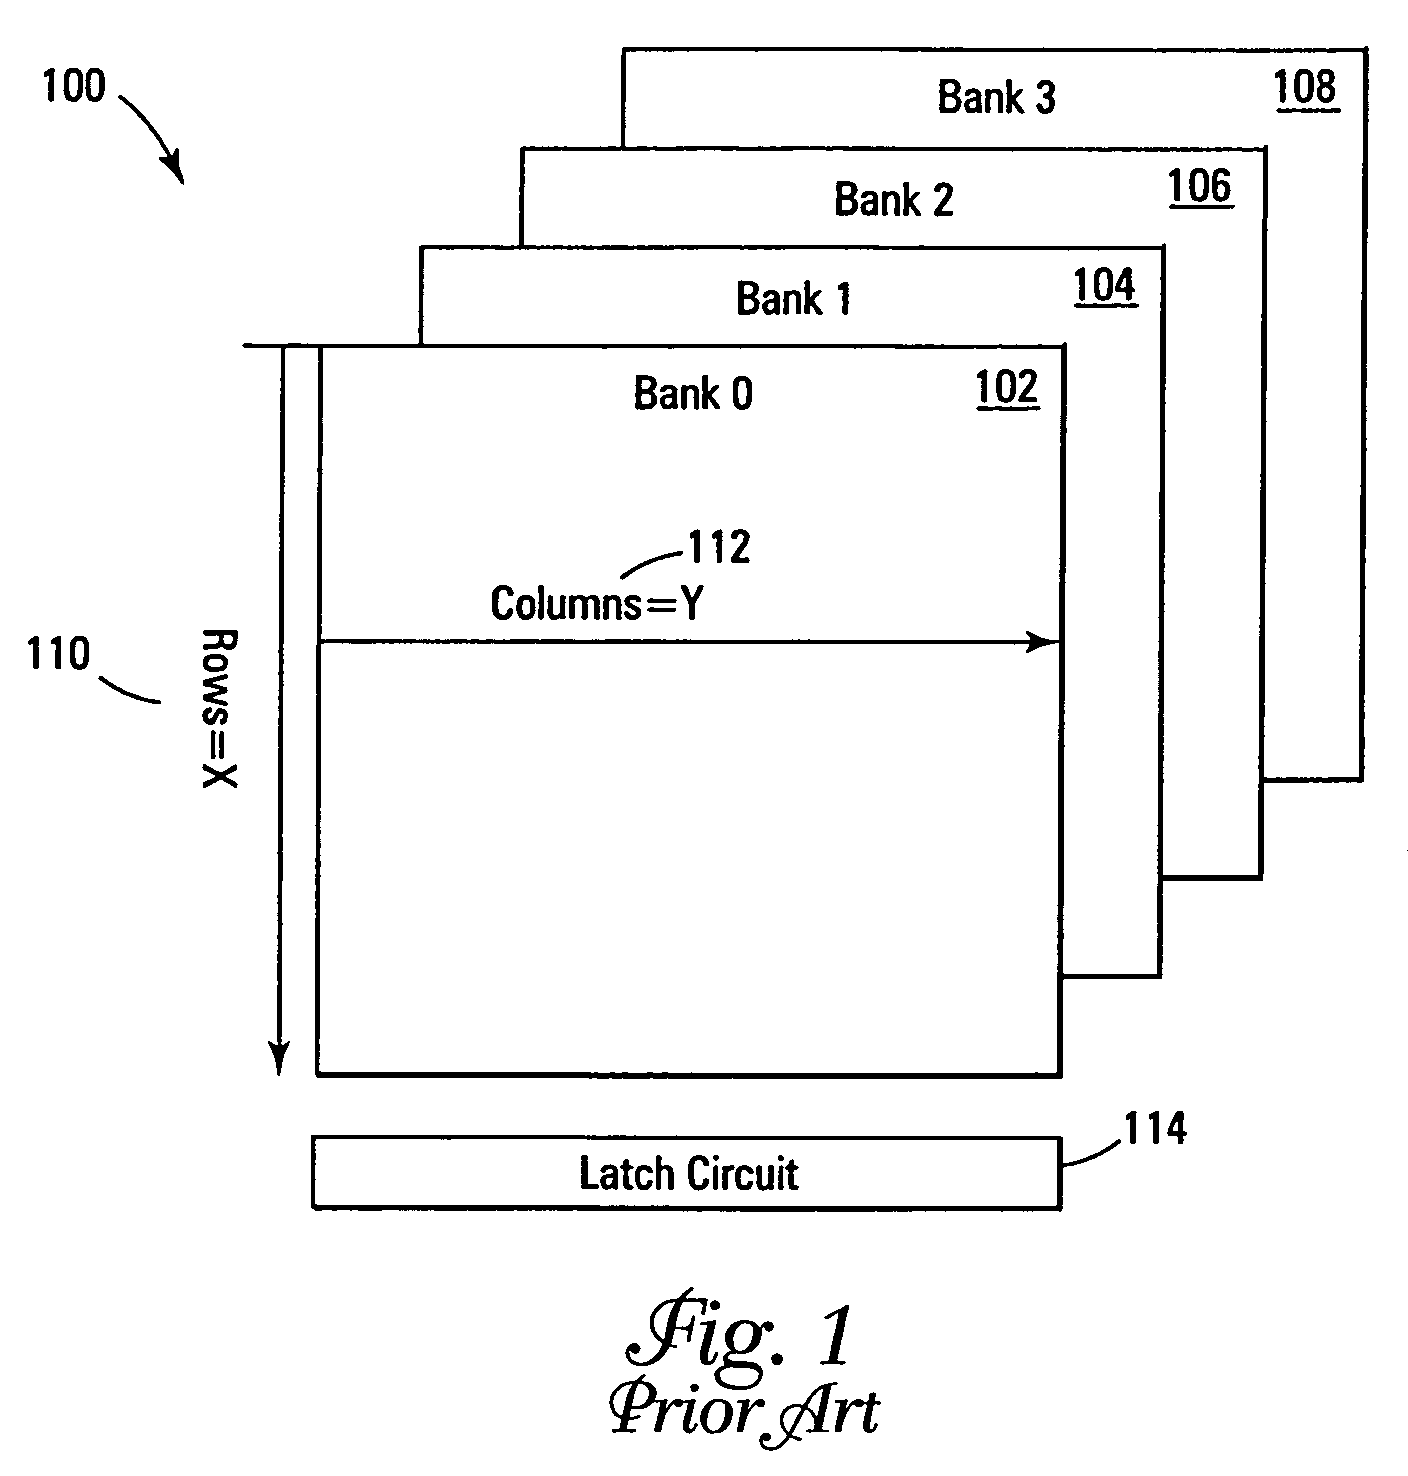 Mode selection in a flash memory device